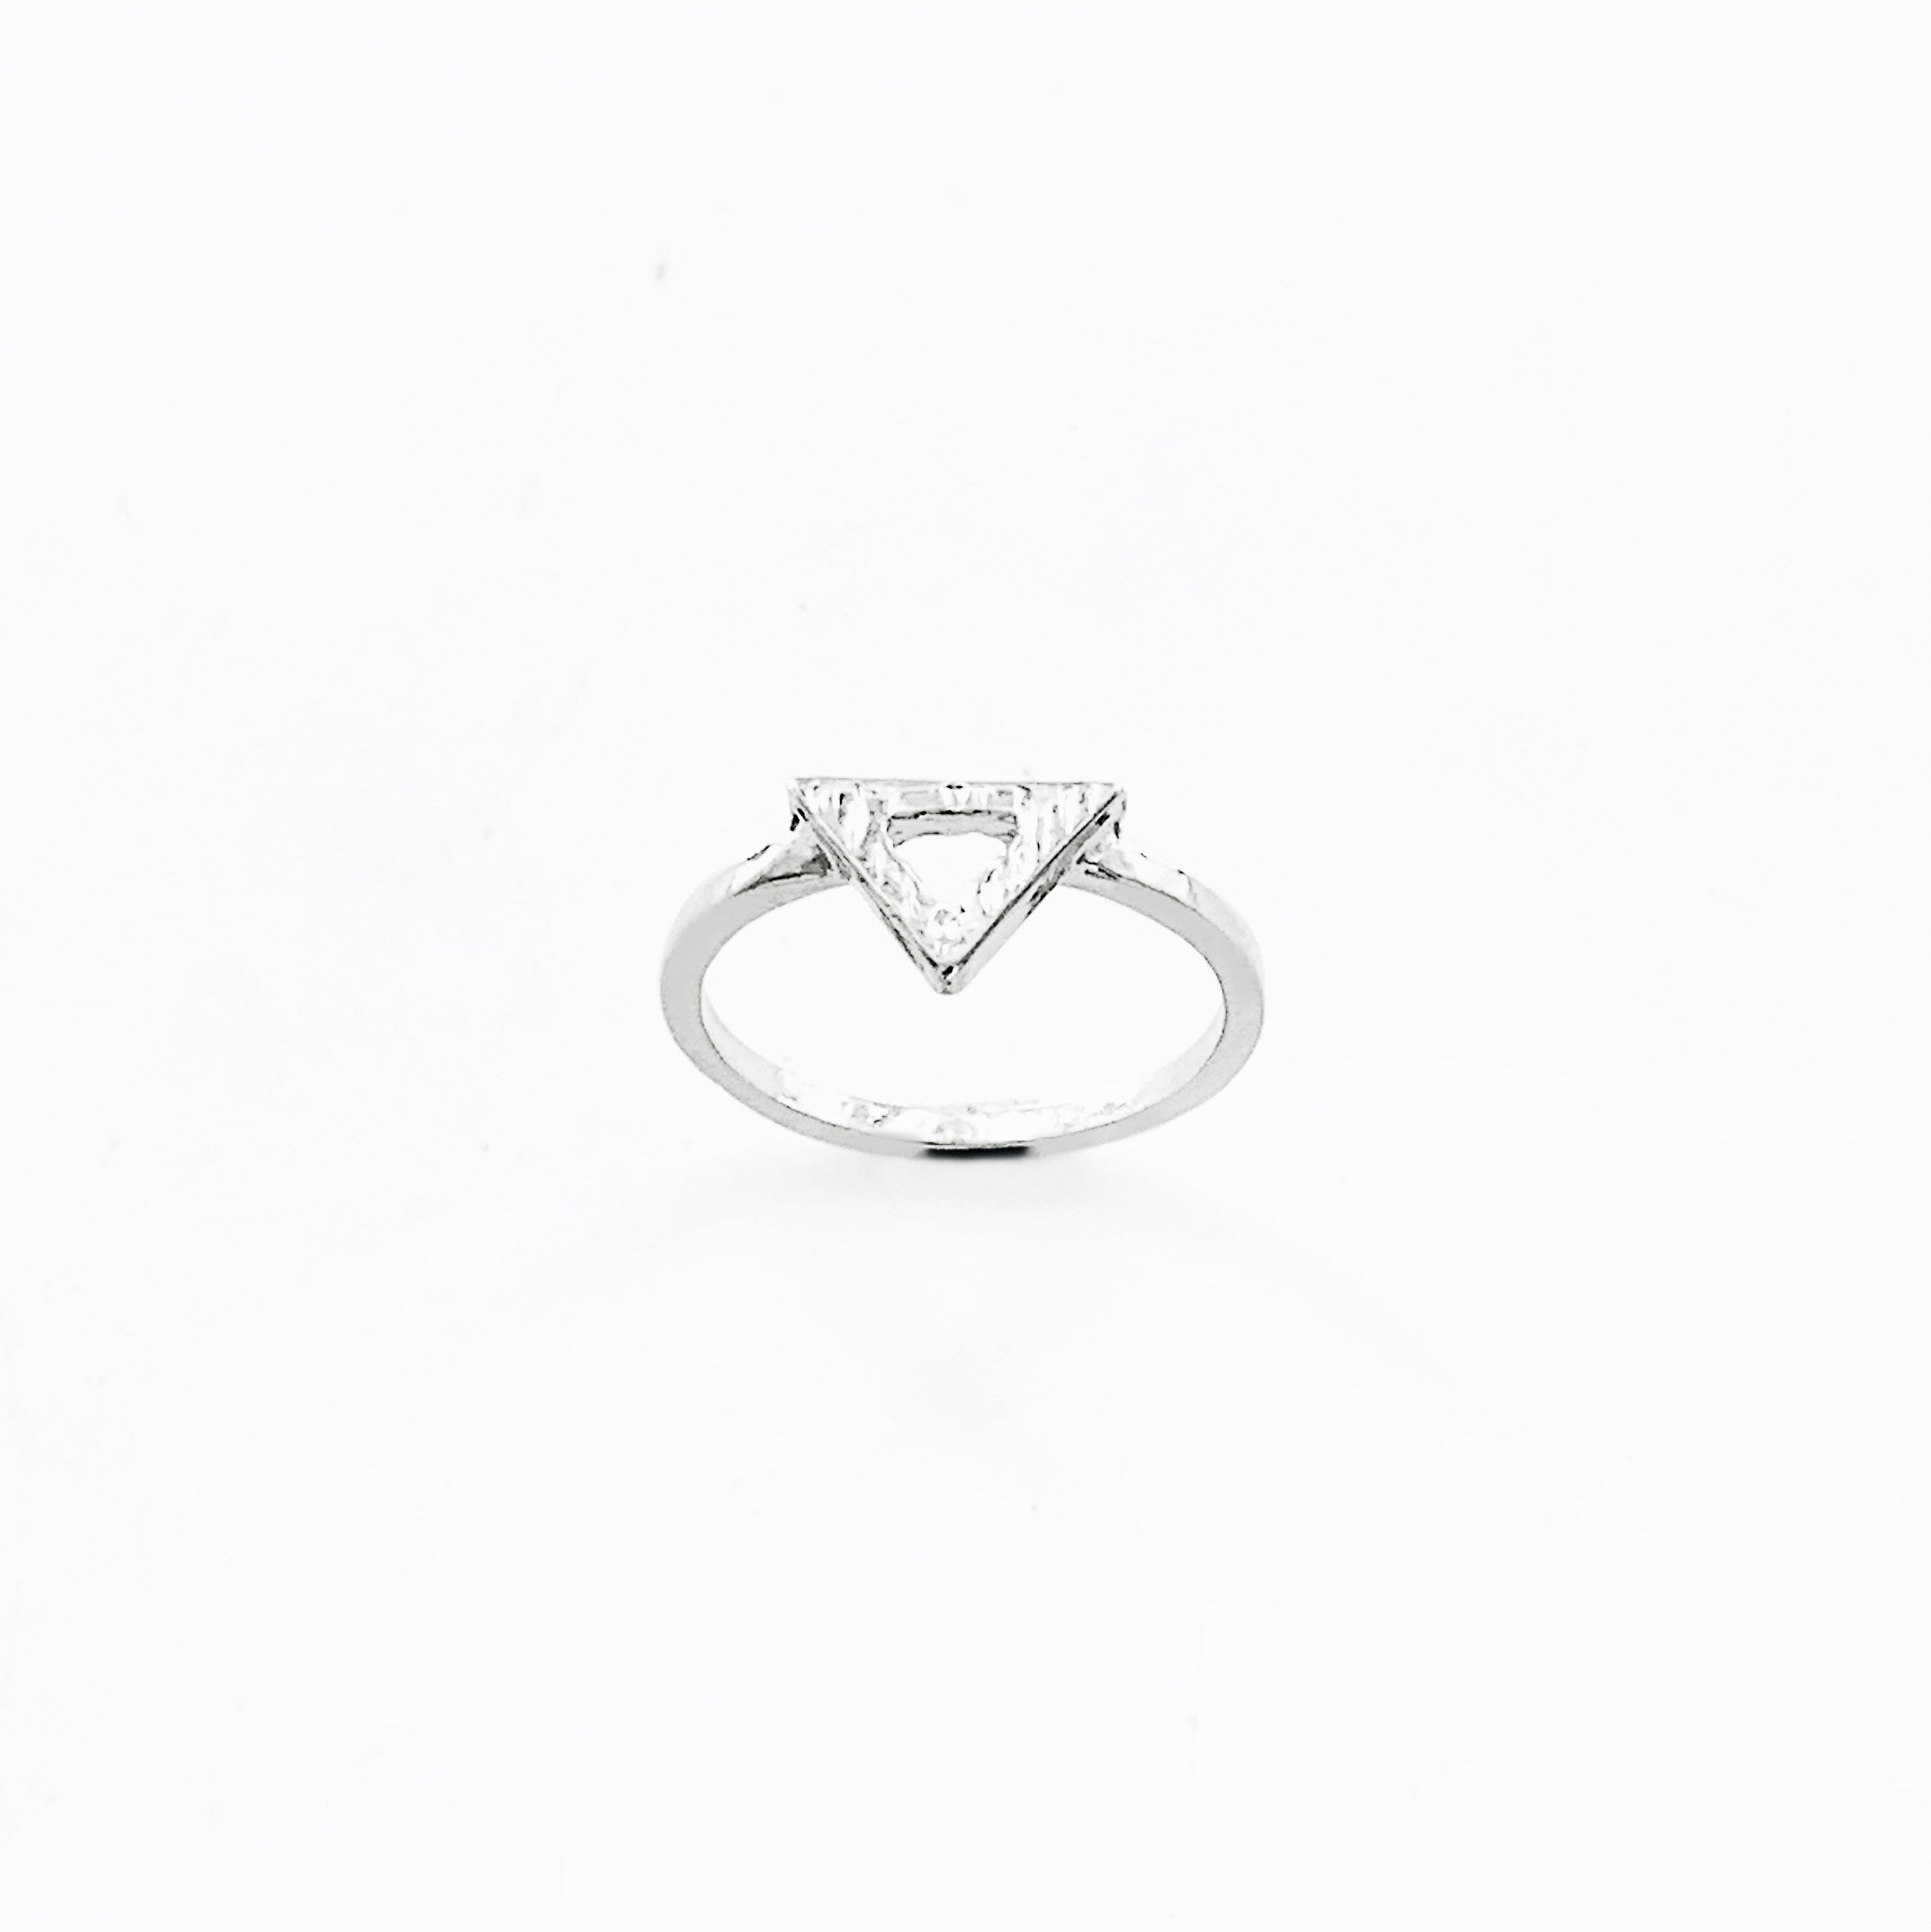 Thin silver band with hollow triangle